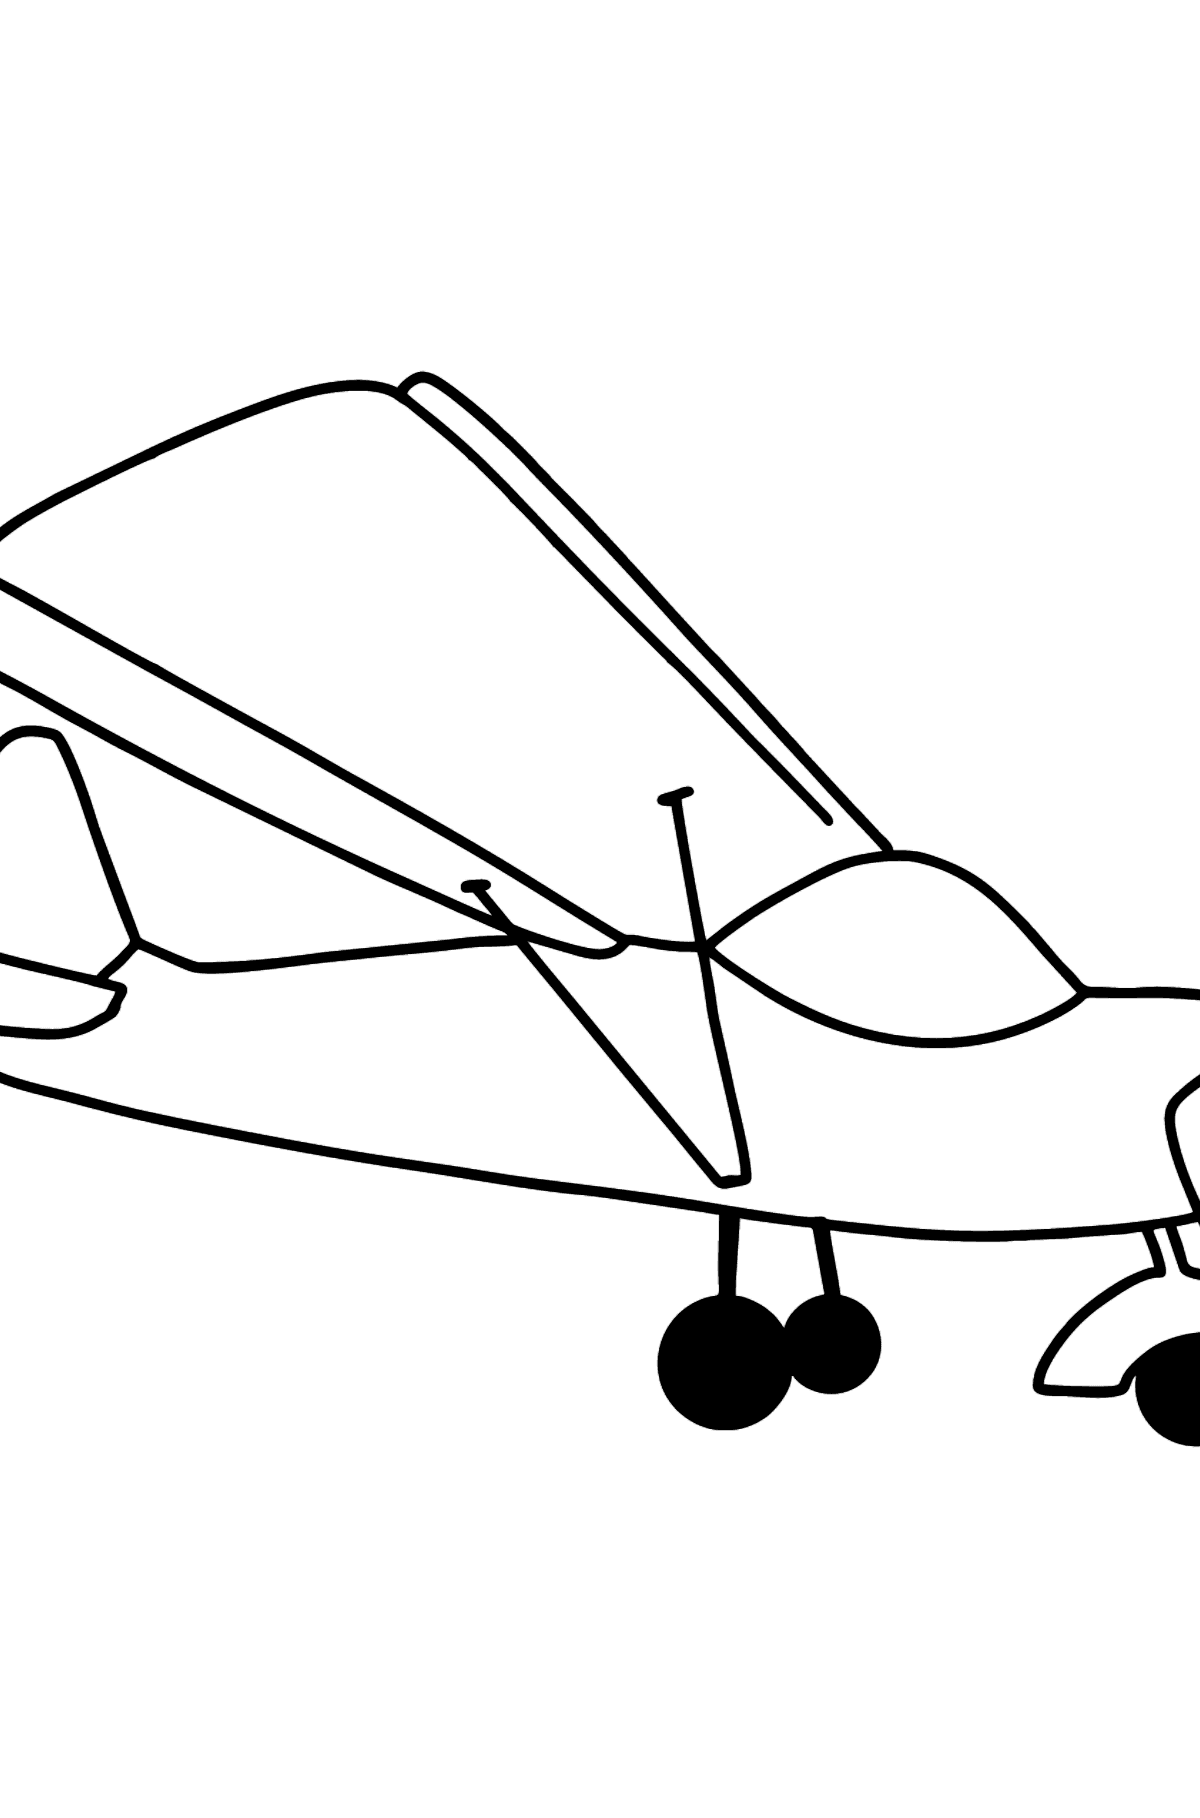 Small Plane coloring page - Coloring Pages for Kids